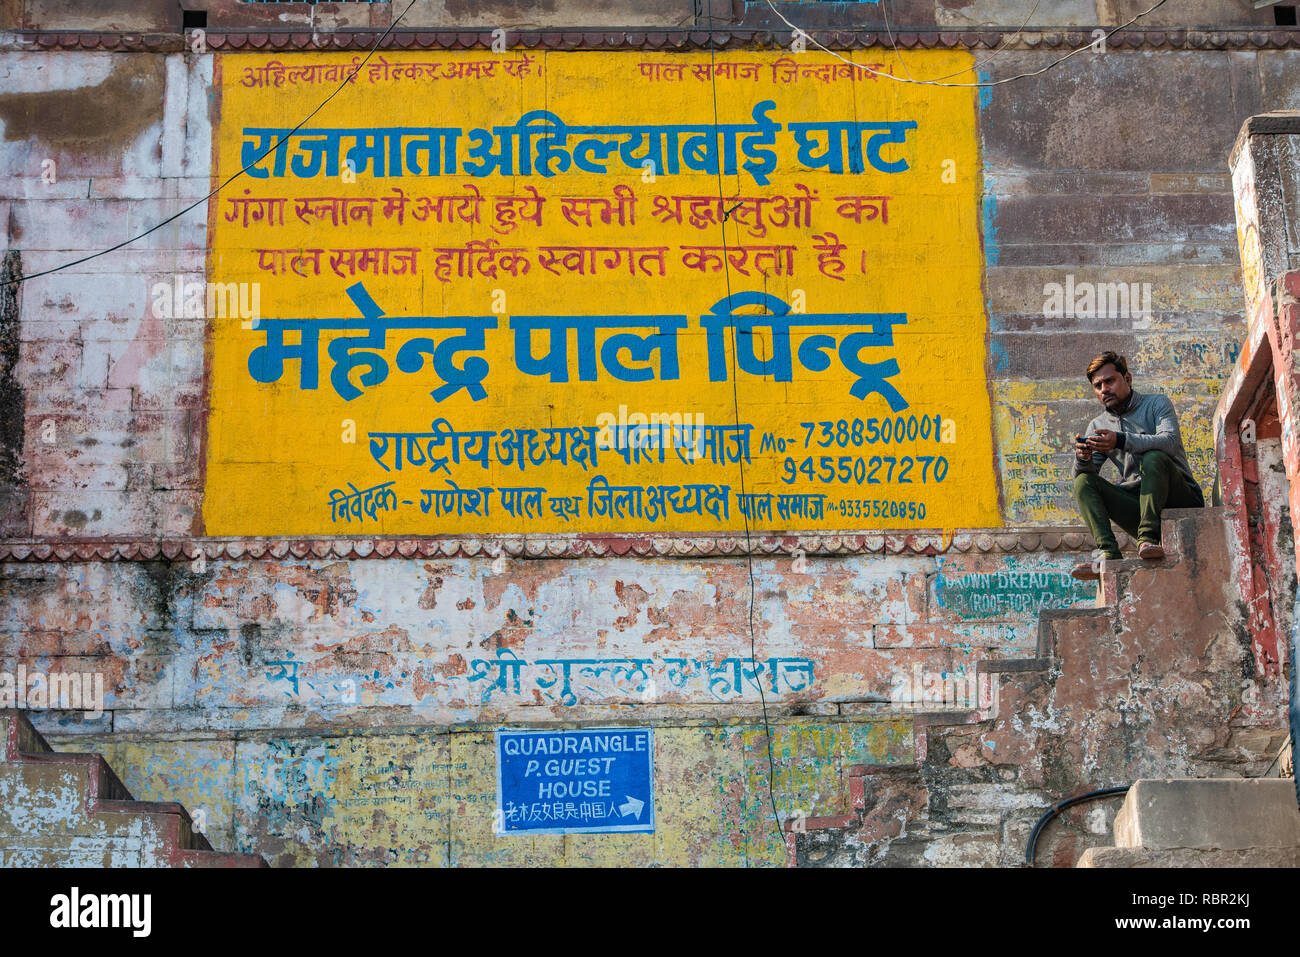 A sign on the wall giving details about a local political party 'Pal Samaj' in Varanasi, India with a man sitting on a step next to it. Stock Photo